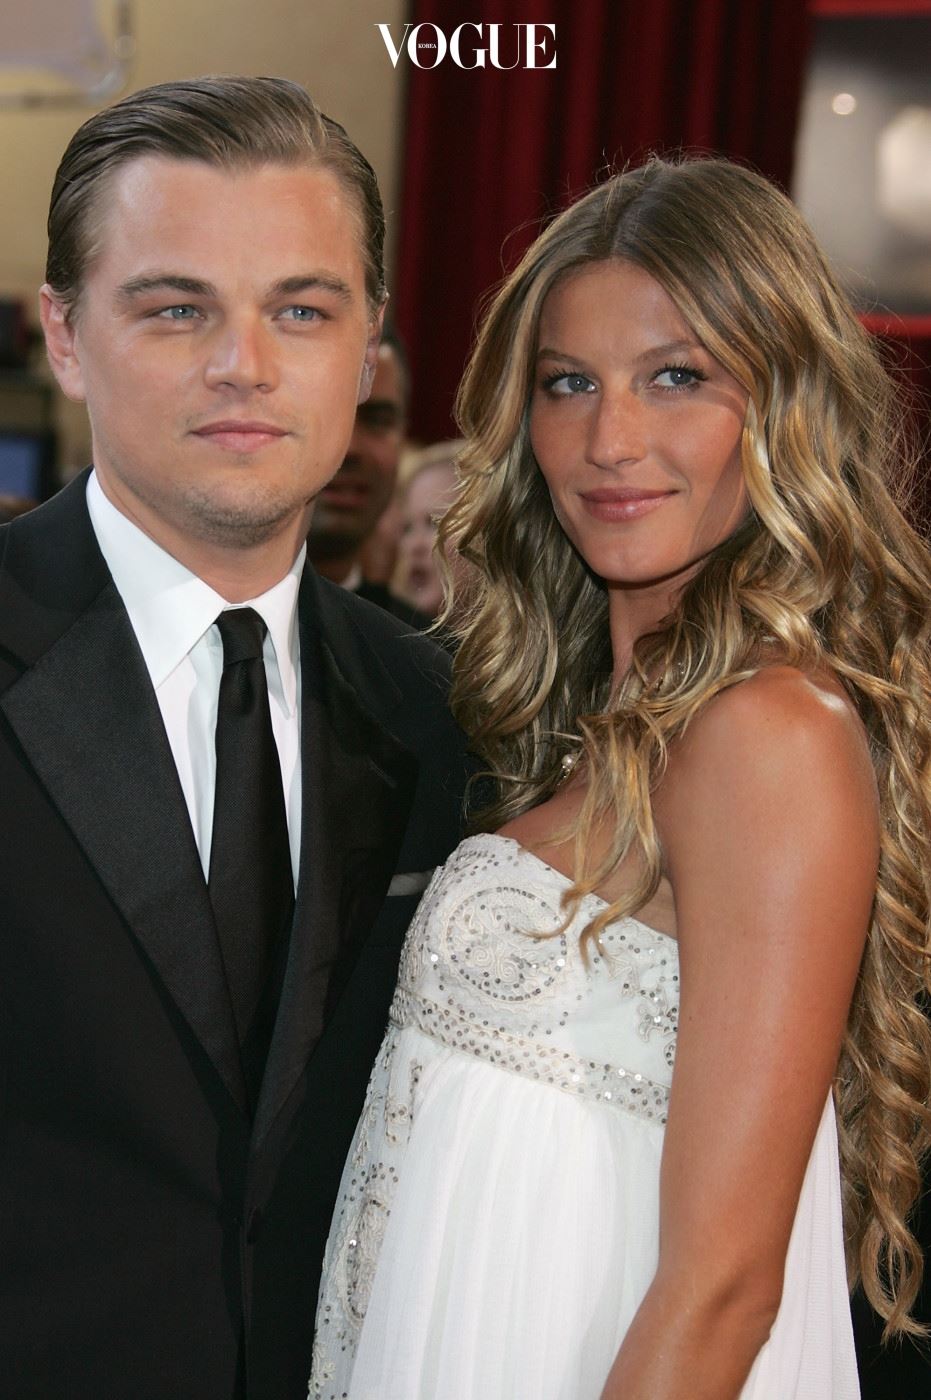 HOLLYWOOD - FEBRUARY 27:  Actor Leonardo DiCaprio, nominated for Best Actor for his role in "The Aviator," arrives with girlfriend Brazilian model Gisele Bundchen at the 77th Annual Academy Awards at the Kodak Theater on February 27, 2005 in Hollywood, California.  (Photo by Vince Bucci/Getty Images)